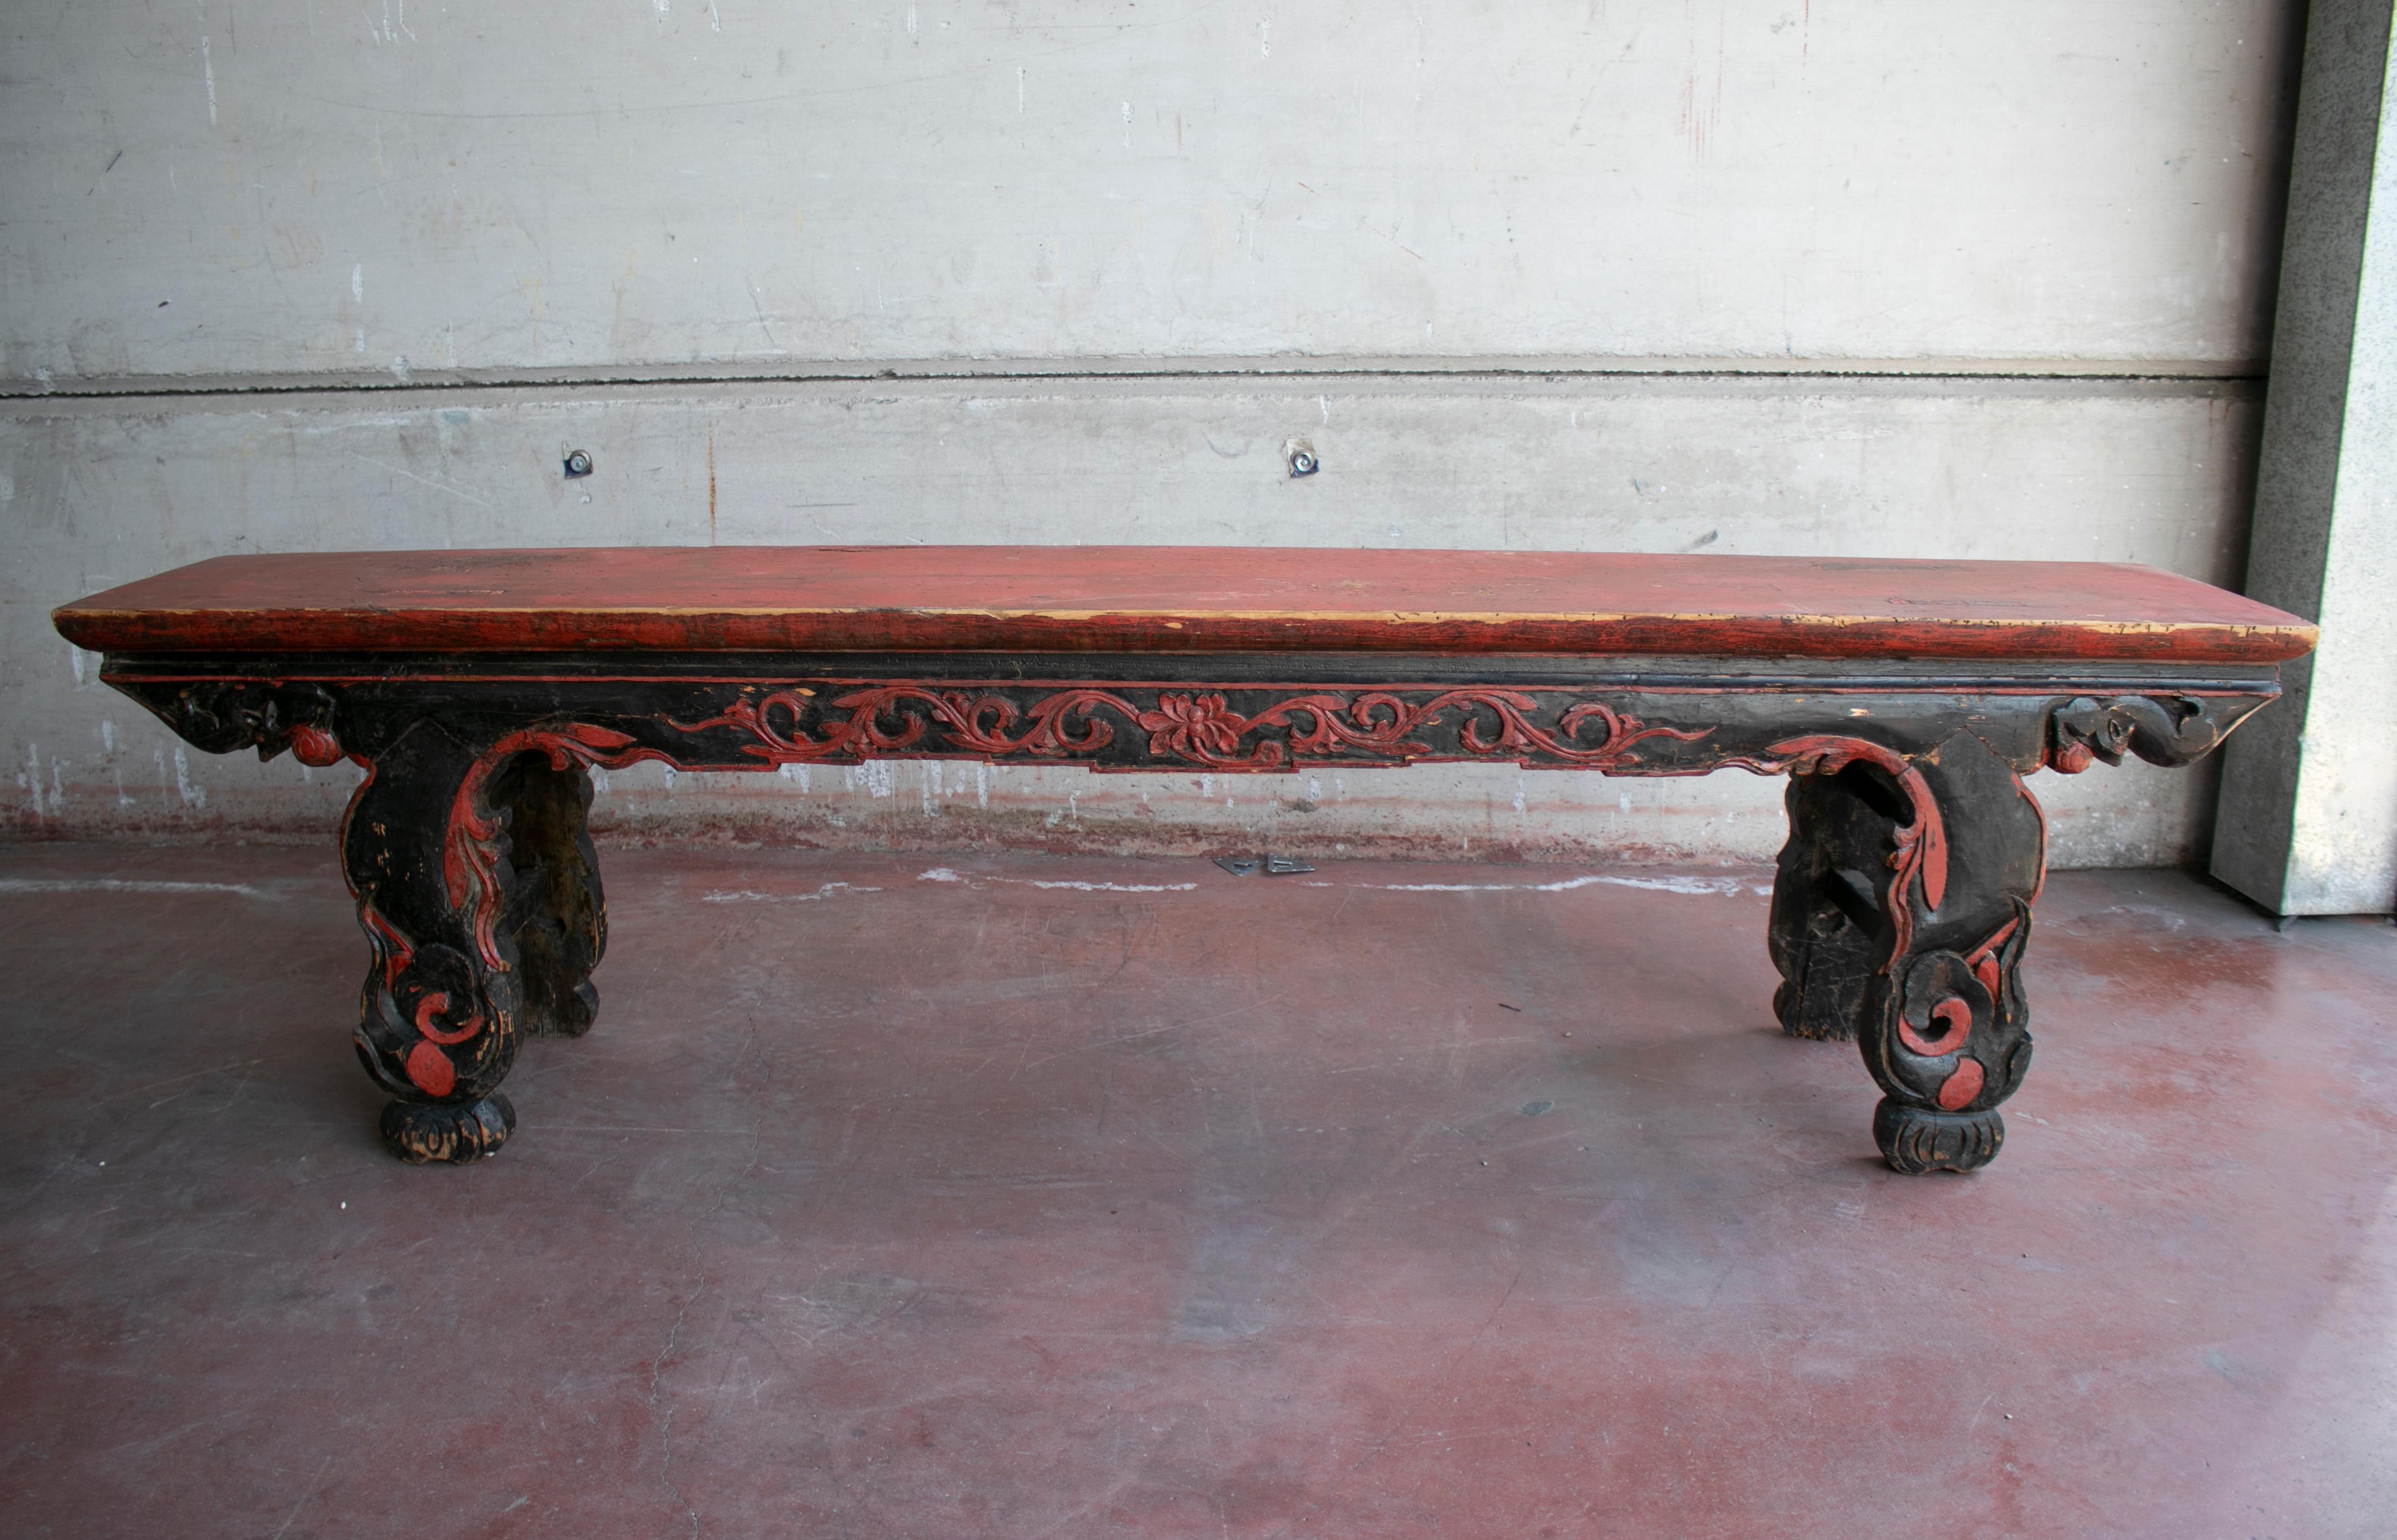 1920s Chinese black and red painted handmade wooden bench with relief carving decorations.